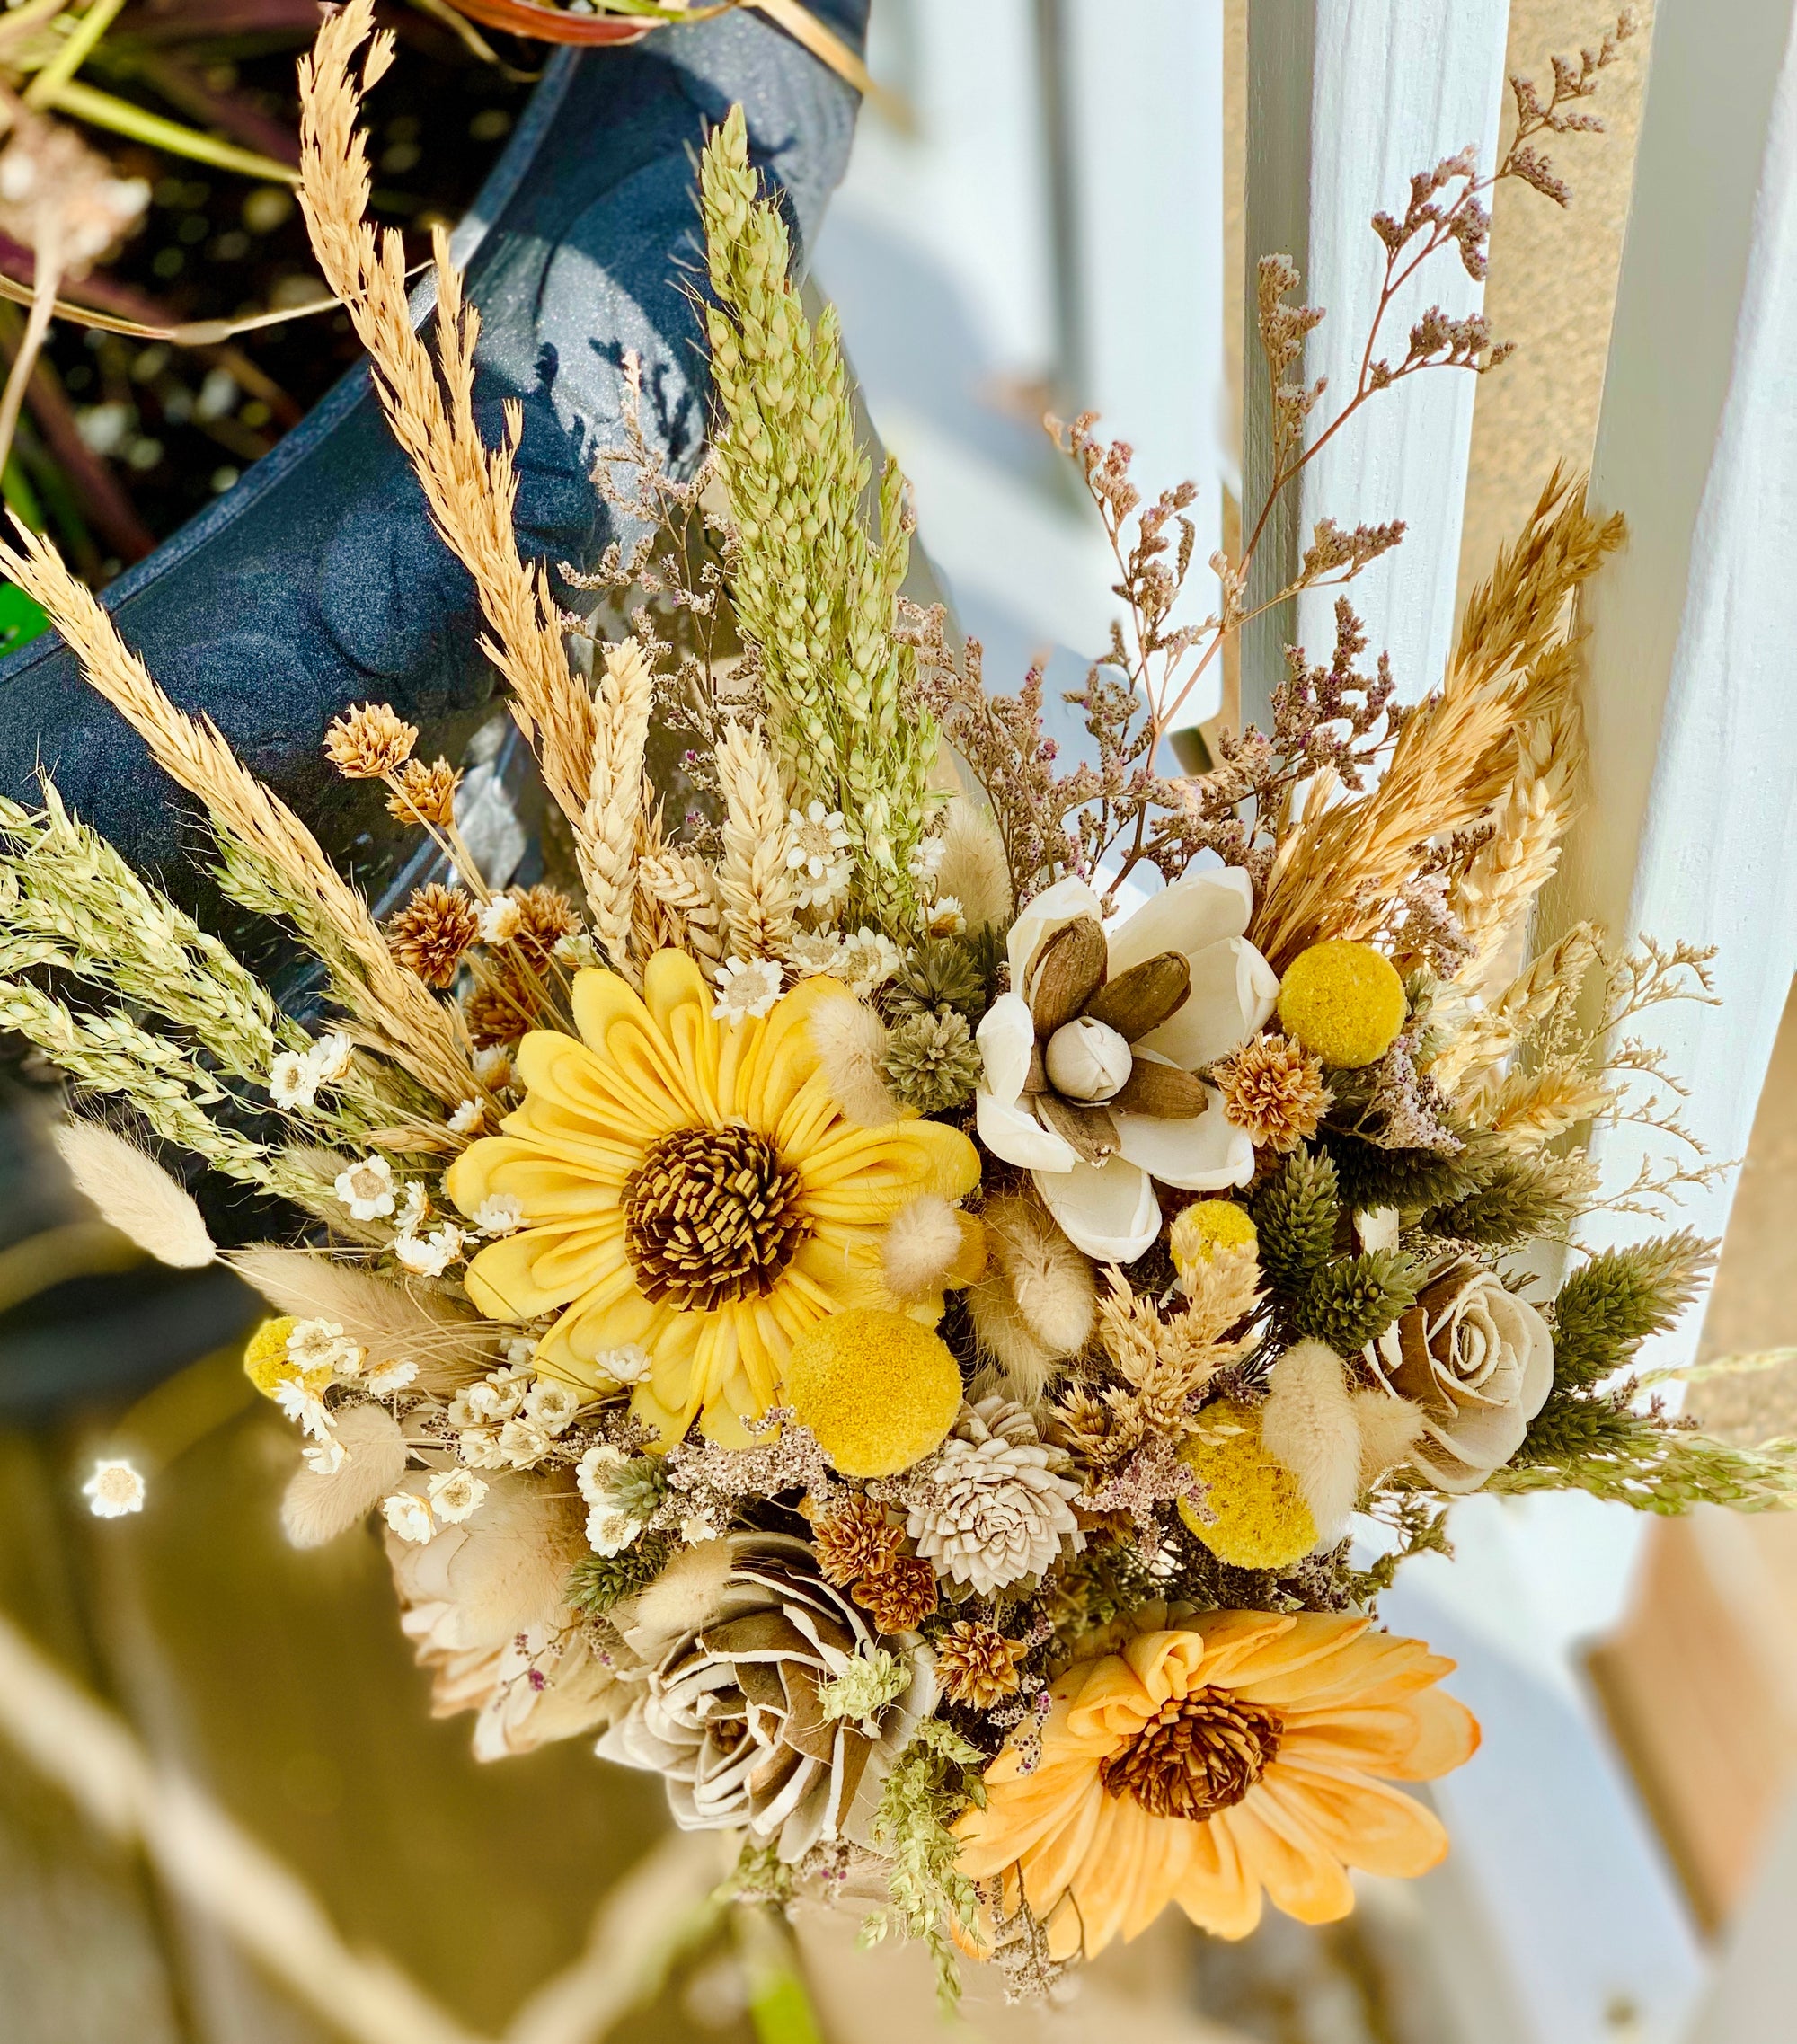 Dried Flower Bouquet Star Flowers Bunny Tale Sunflowers Sola Flowe Curiousfloral